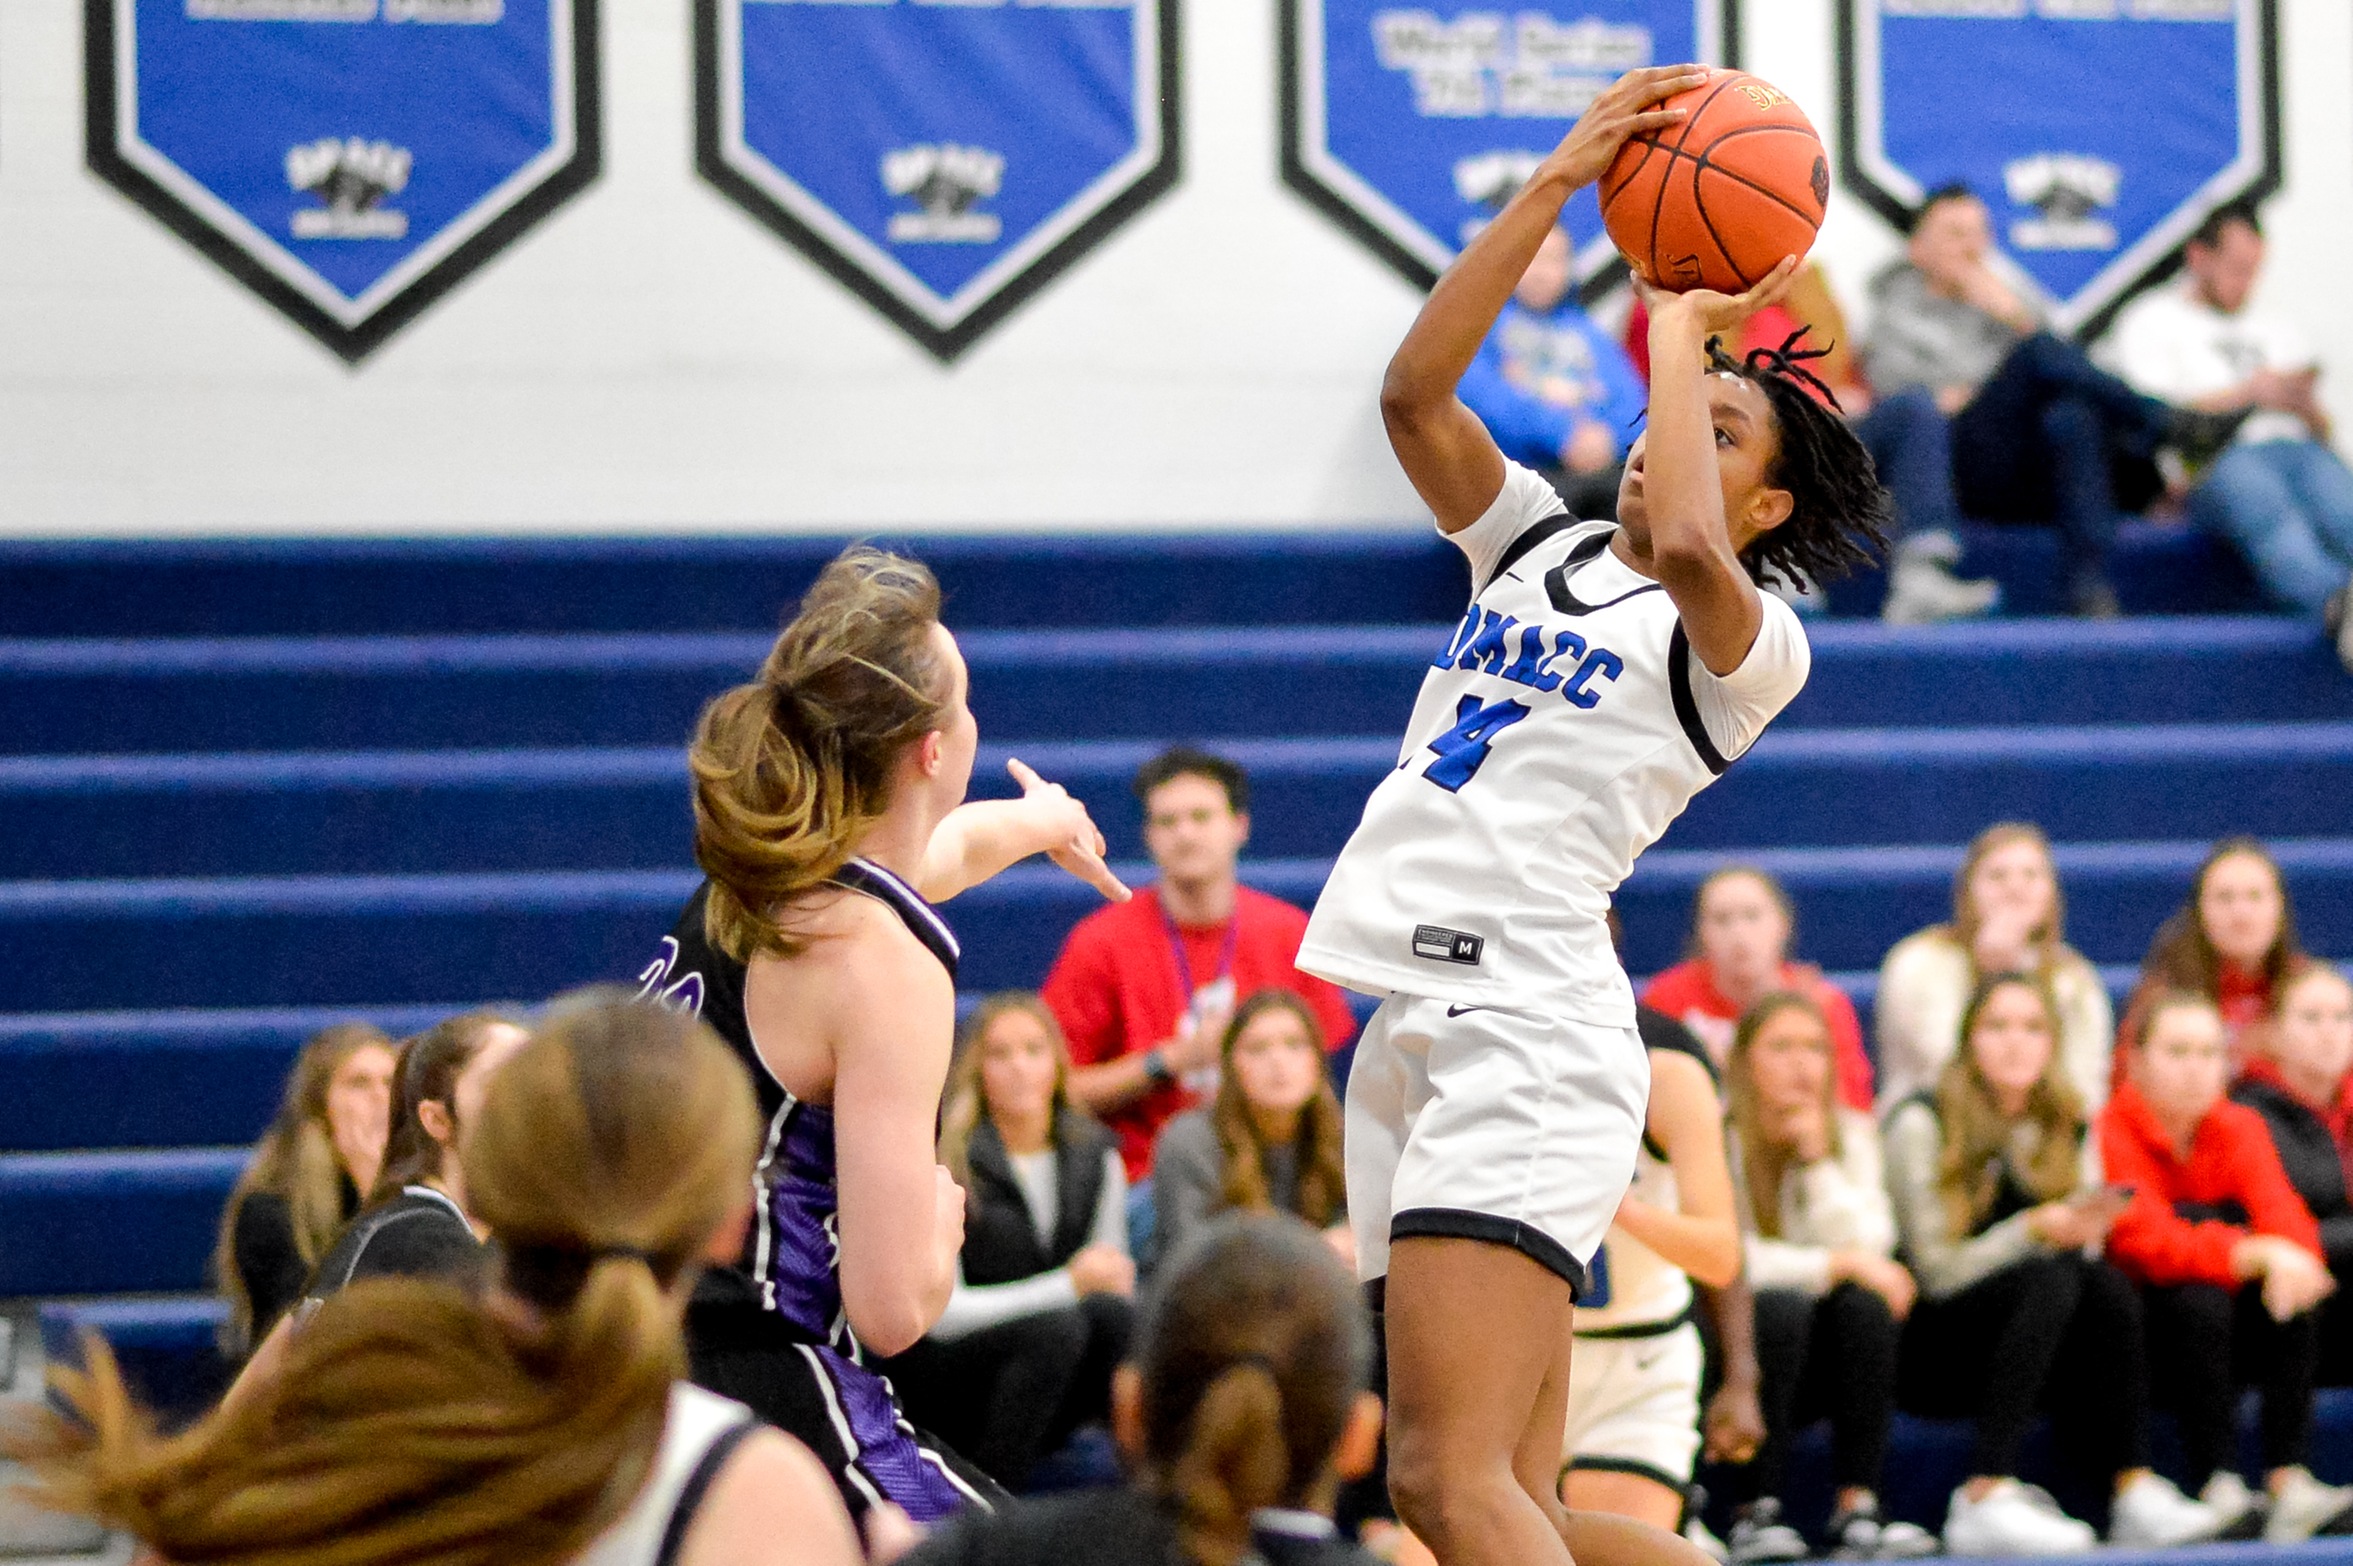 Loss to ICCC ends season for DMACC women's basketball